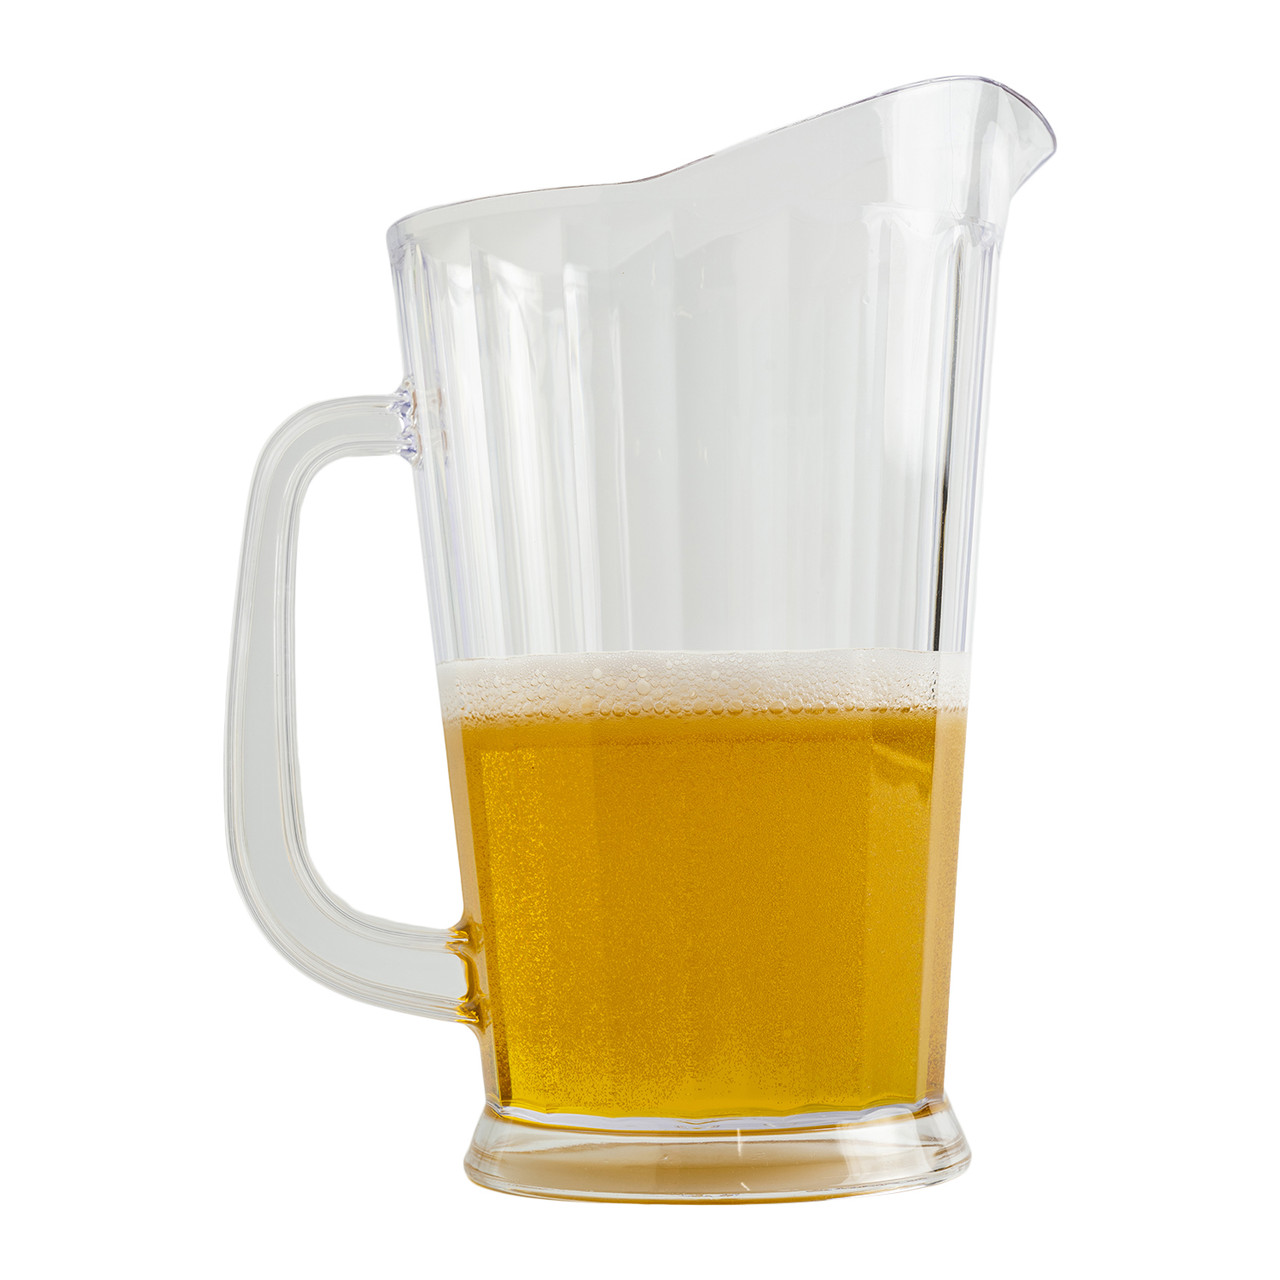 https://cdn11.bigcommerce.com/s-ek50668lzs/images/stencil/1280x1280/products/2684/4769/beer-pitcher2__50331.1680032770.jpg?c=1?imbypass=on